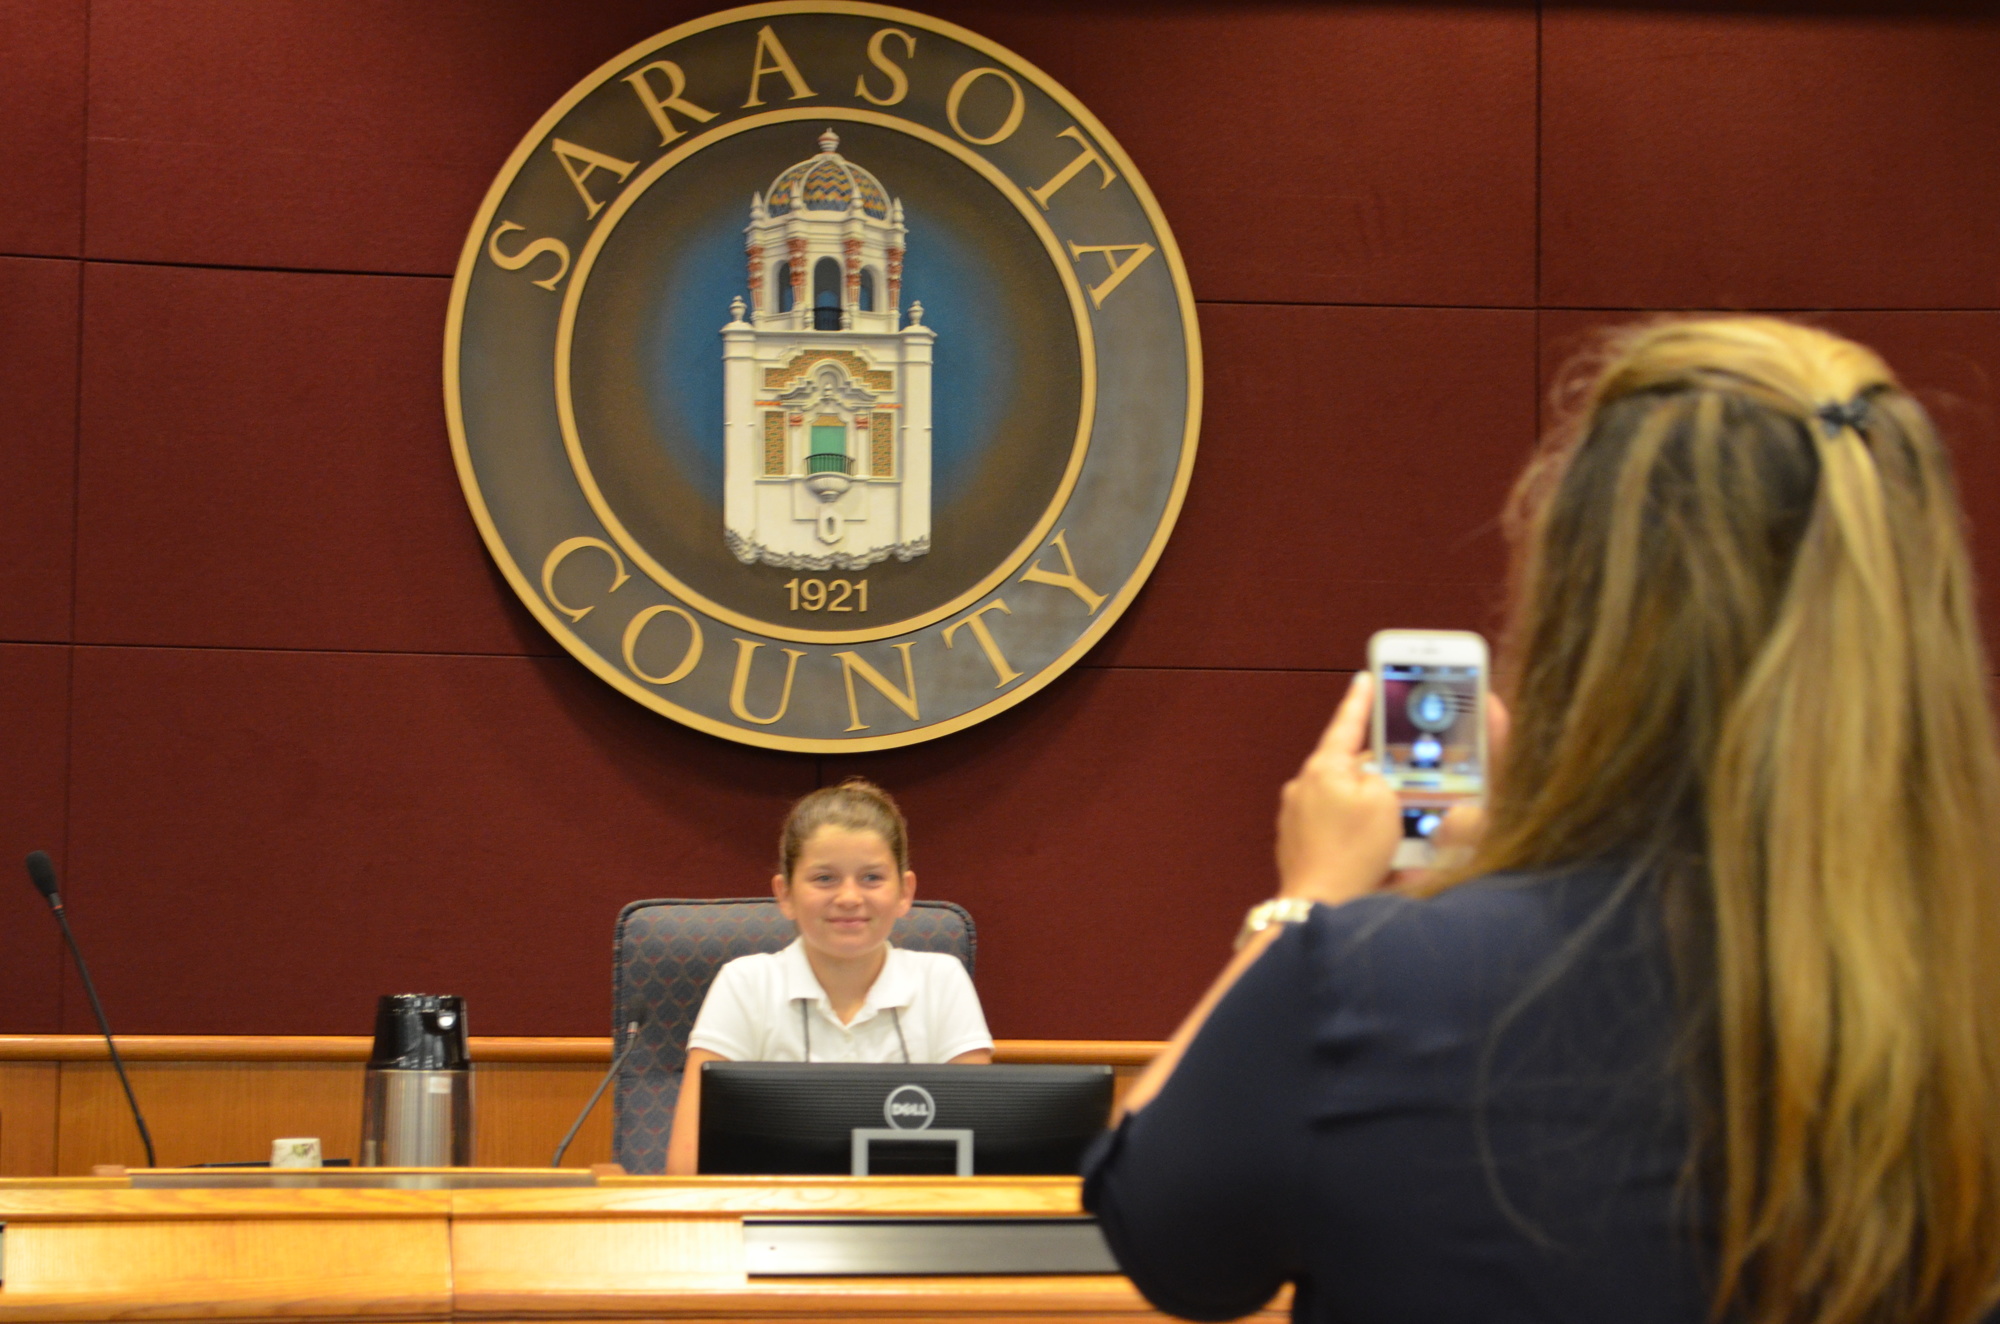 Kiersten Pedersen brought her daughter Alexi Hornacek to work for the third year. Every year they take a photo of Hornacek sitting in the Sarasota County Commission chambers.